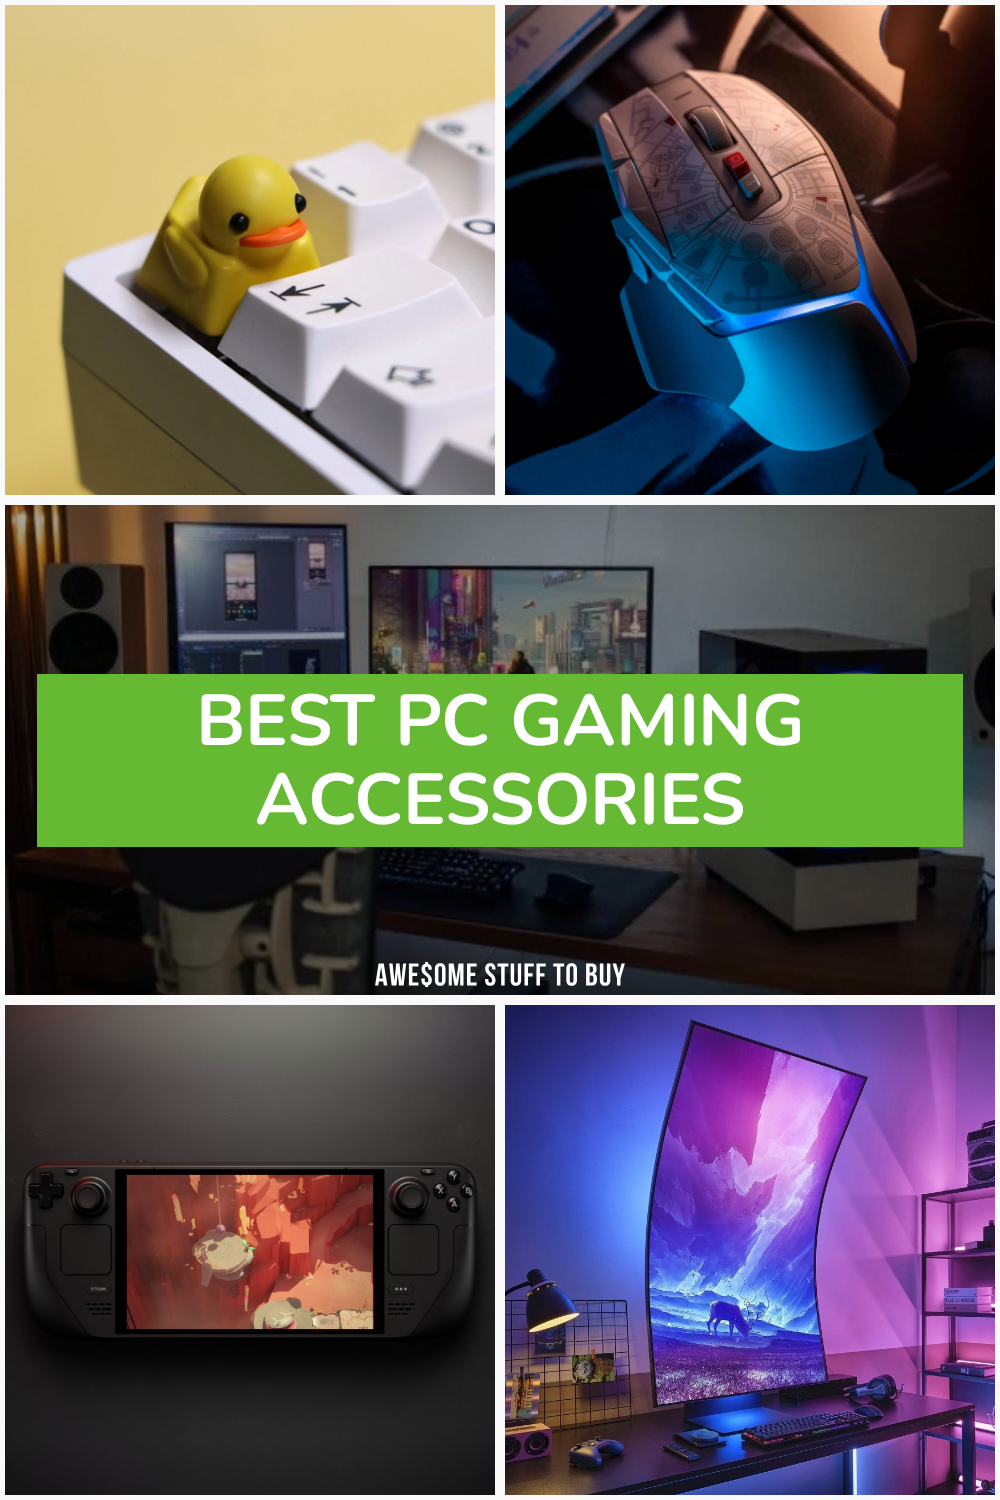 PC Gaming Accessories // Awesome Stuff to Buy